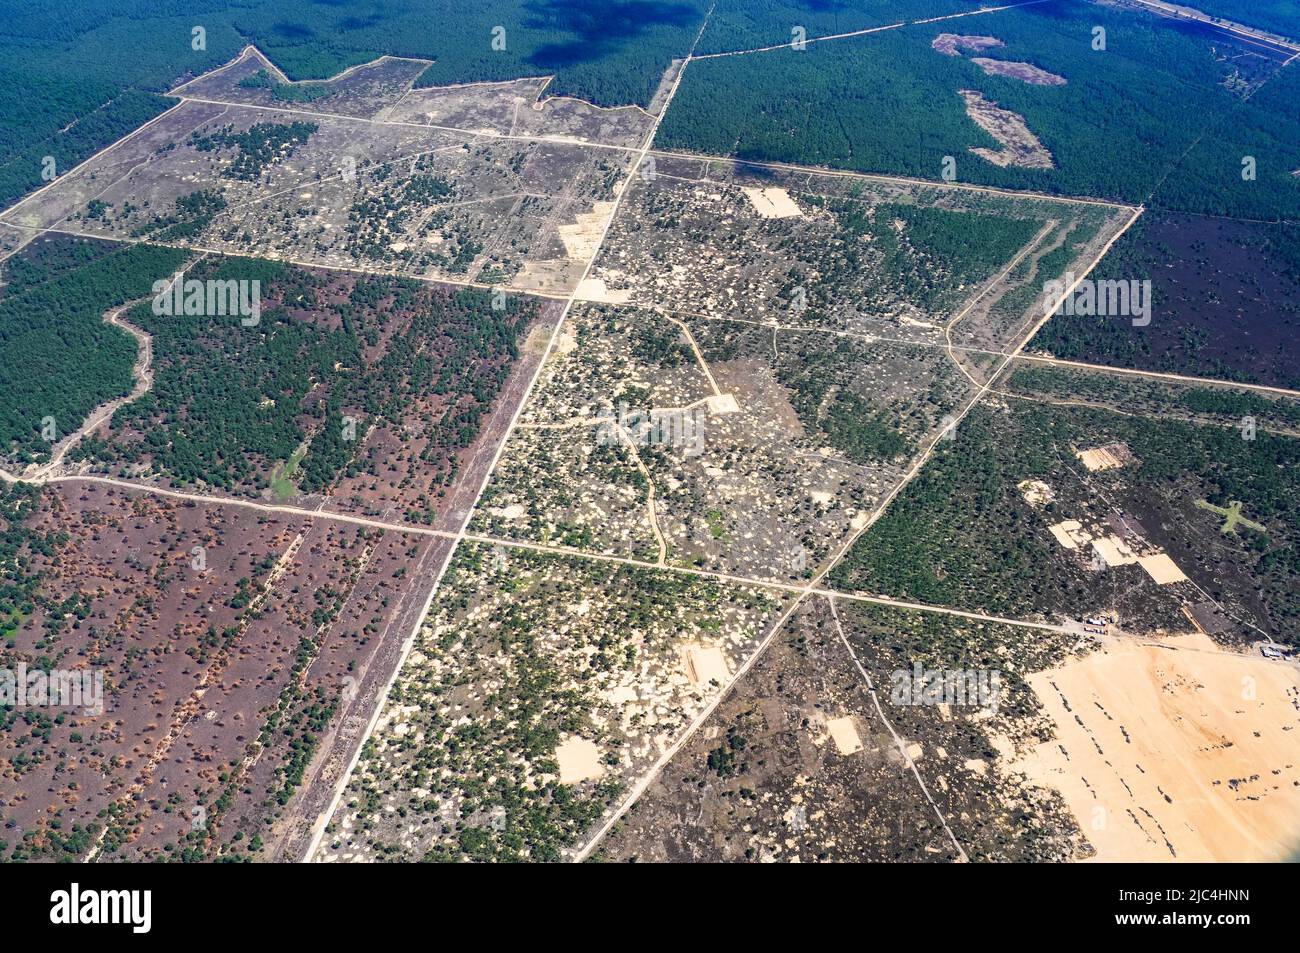 Aerial view of the scarred landscape of the Wittstock military training area, Bombodrom, munitions, salvage, search, scar, Soviet forces Stock Photo